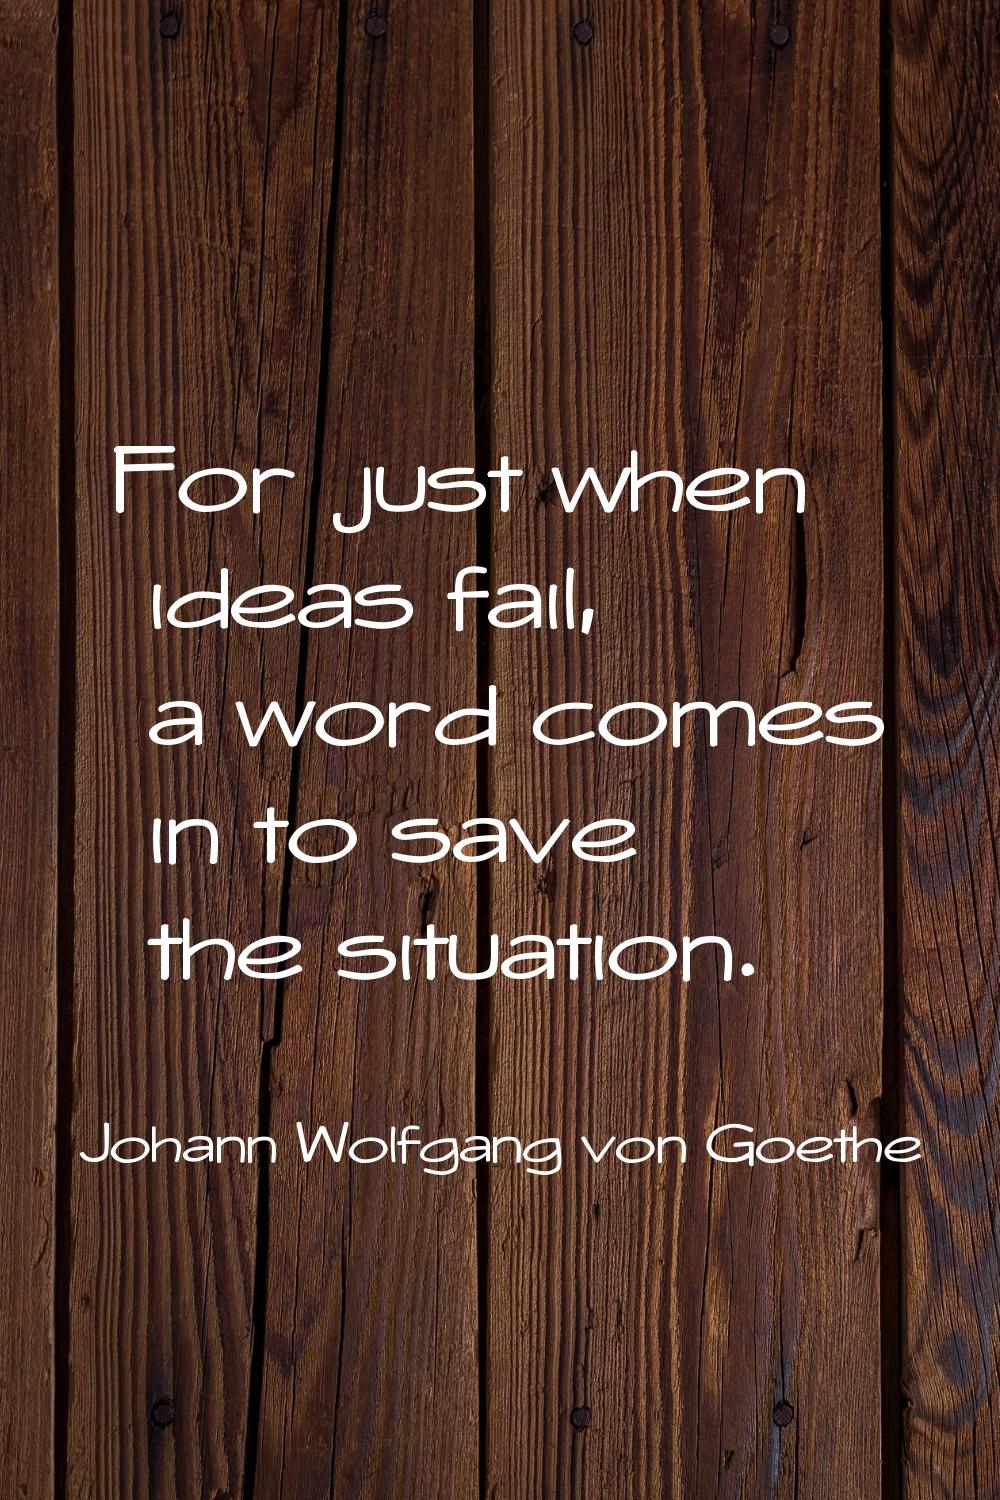 For just when ideas fail, a word comes in to save the situation.